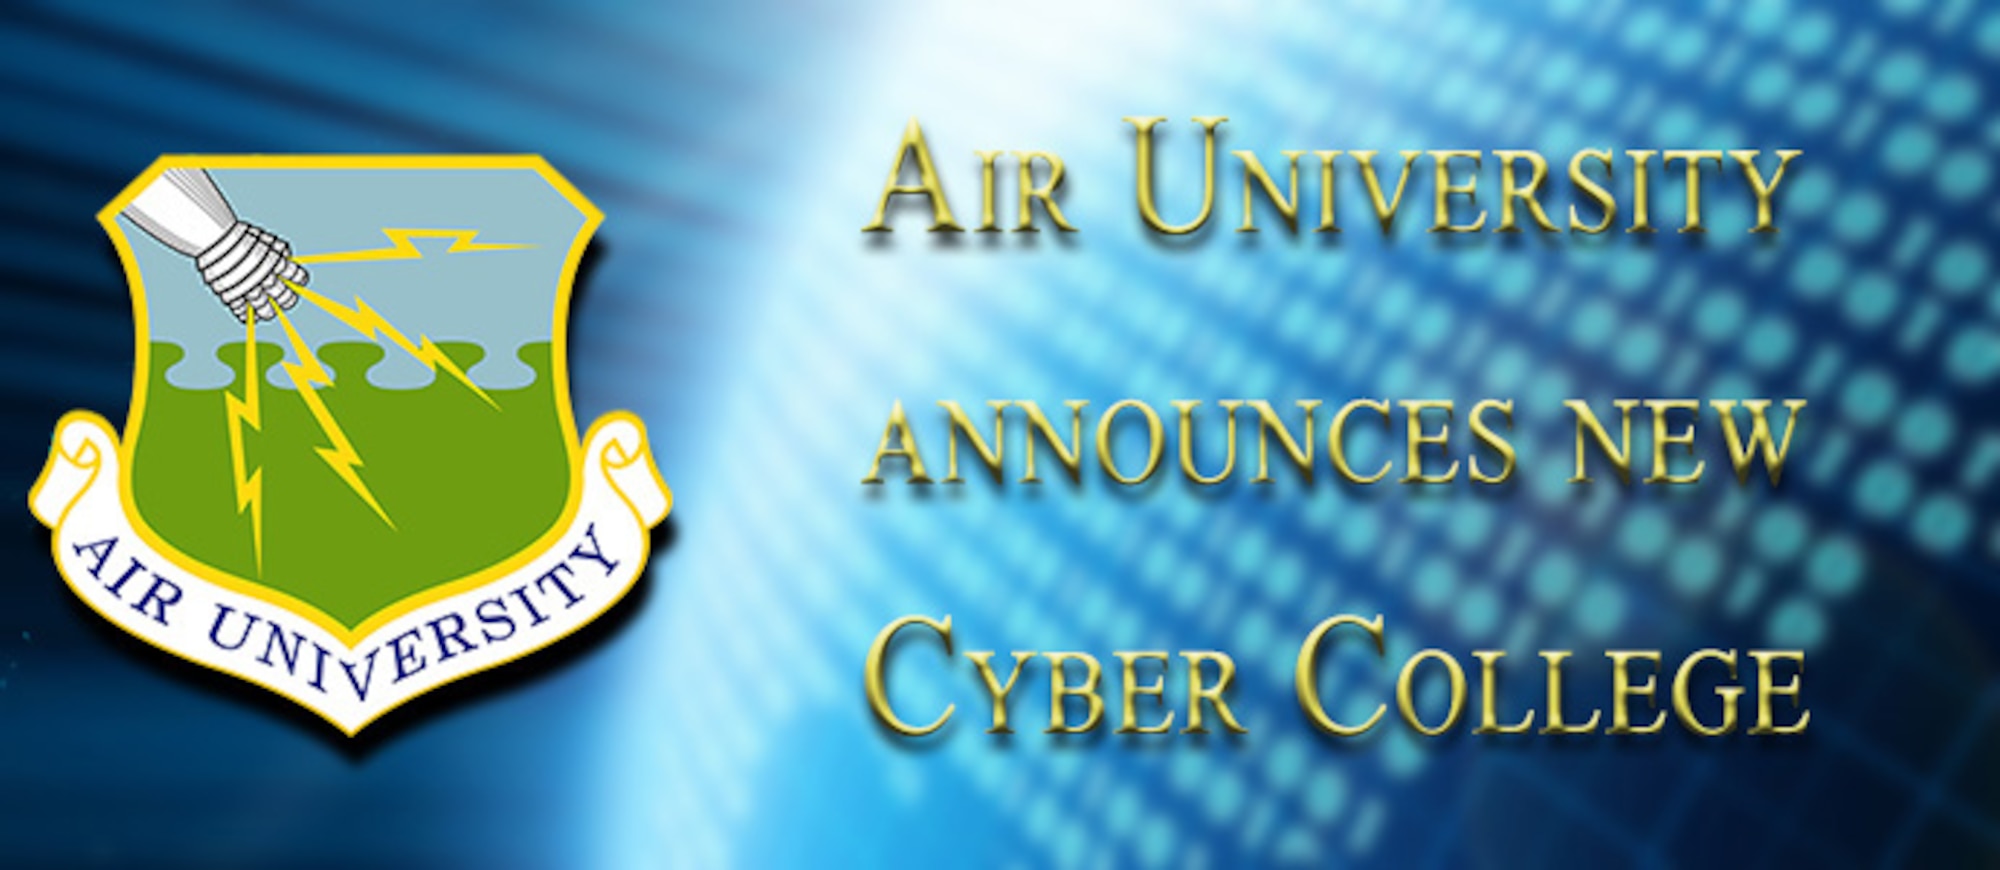 Air University announces new Cyber College. (Courtesy graphic)